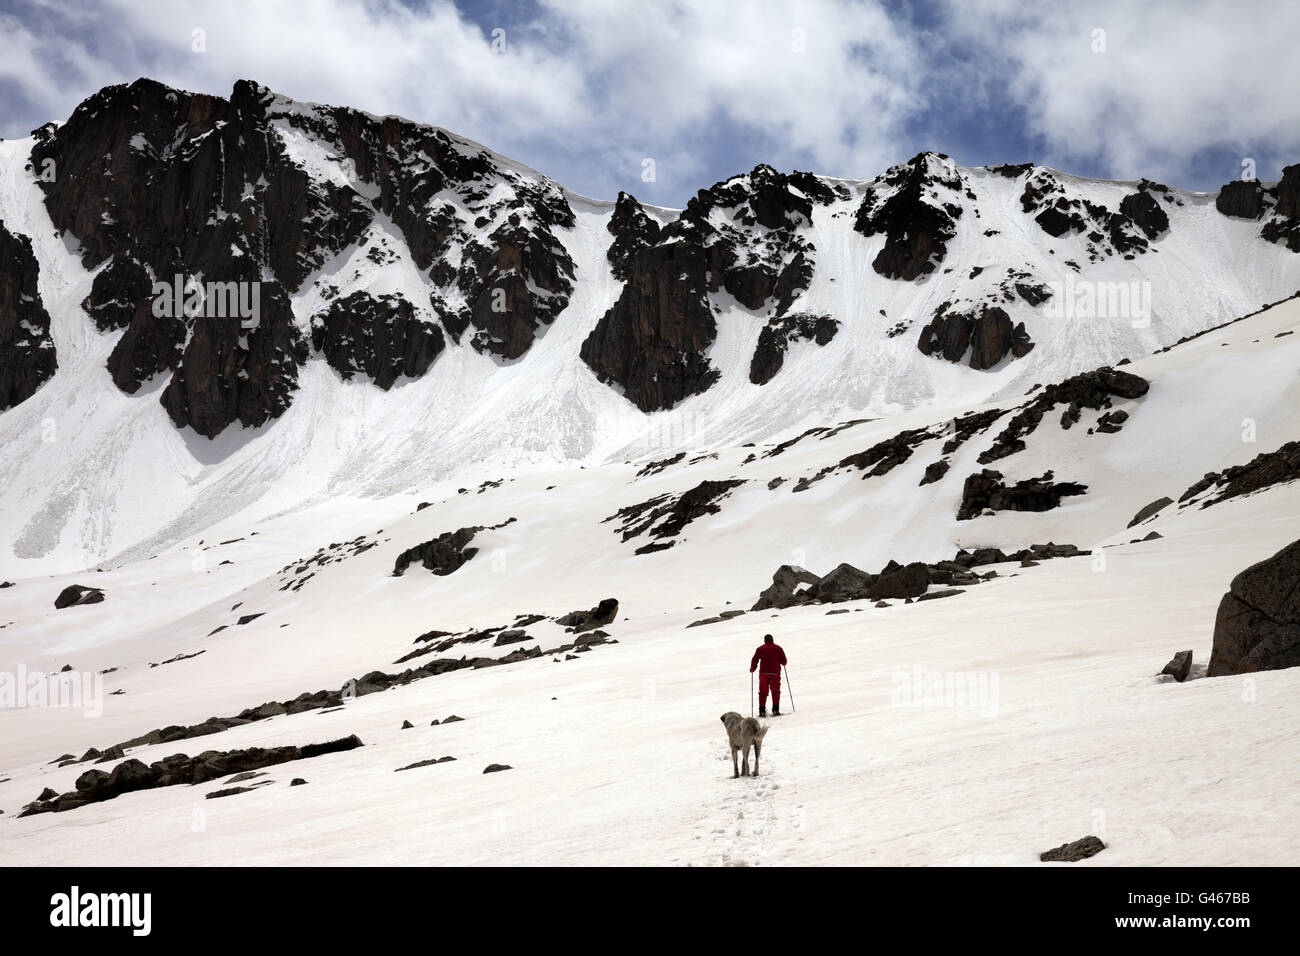 Hiker and dog in snowy mountains at spring. Turkey, Kachkar Mountains, highest part of Pontic Mountains. Stock Photo